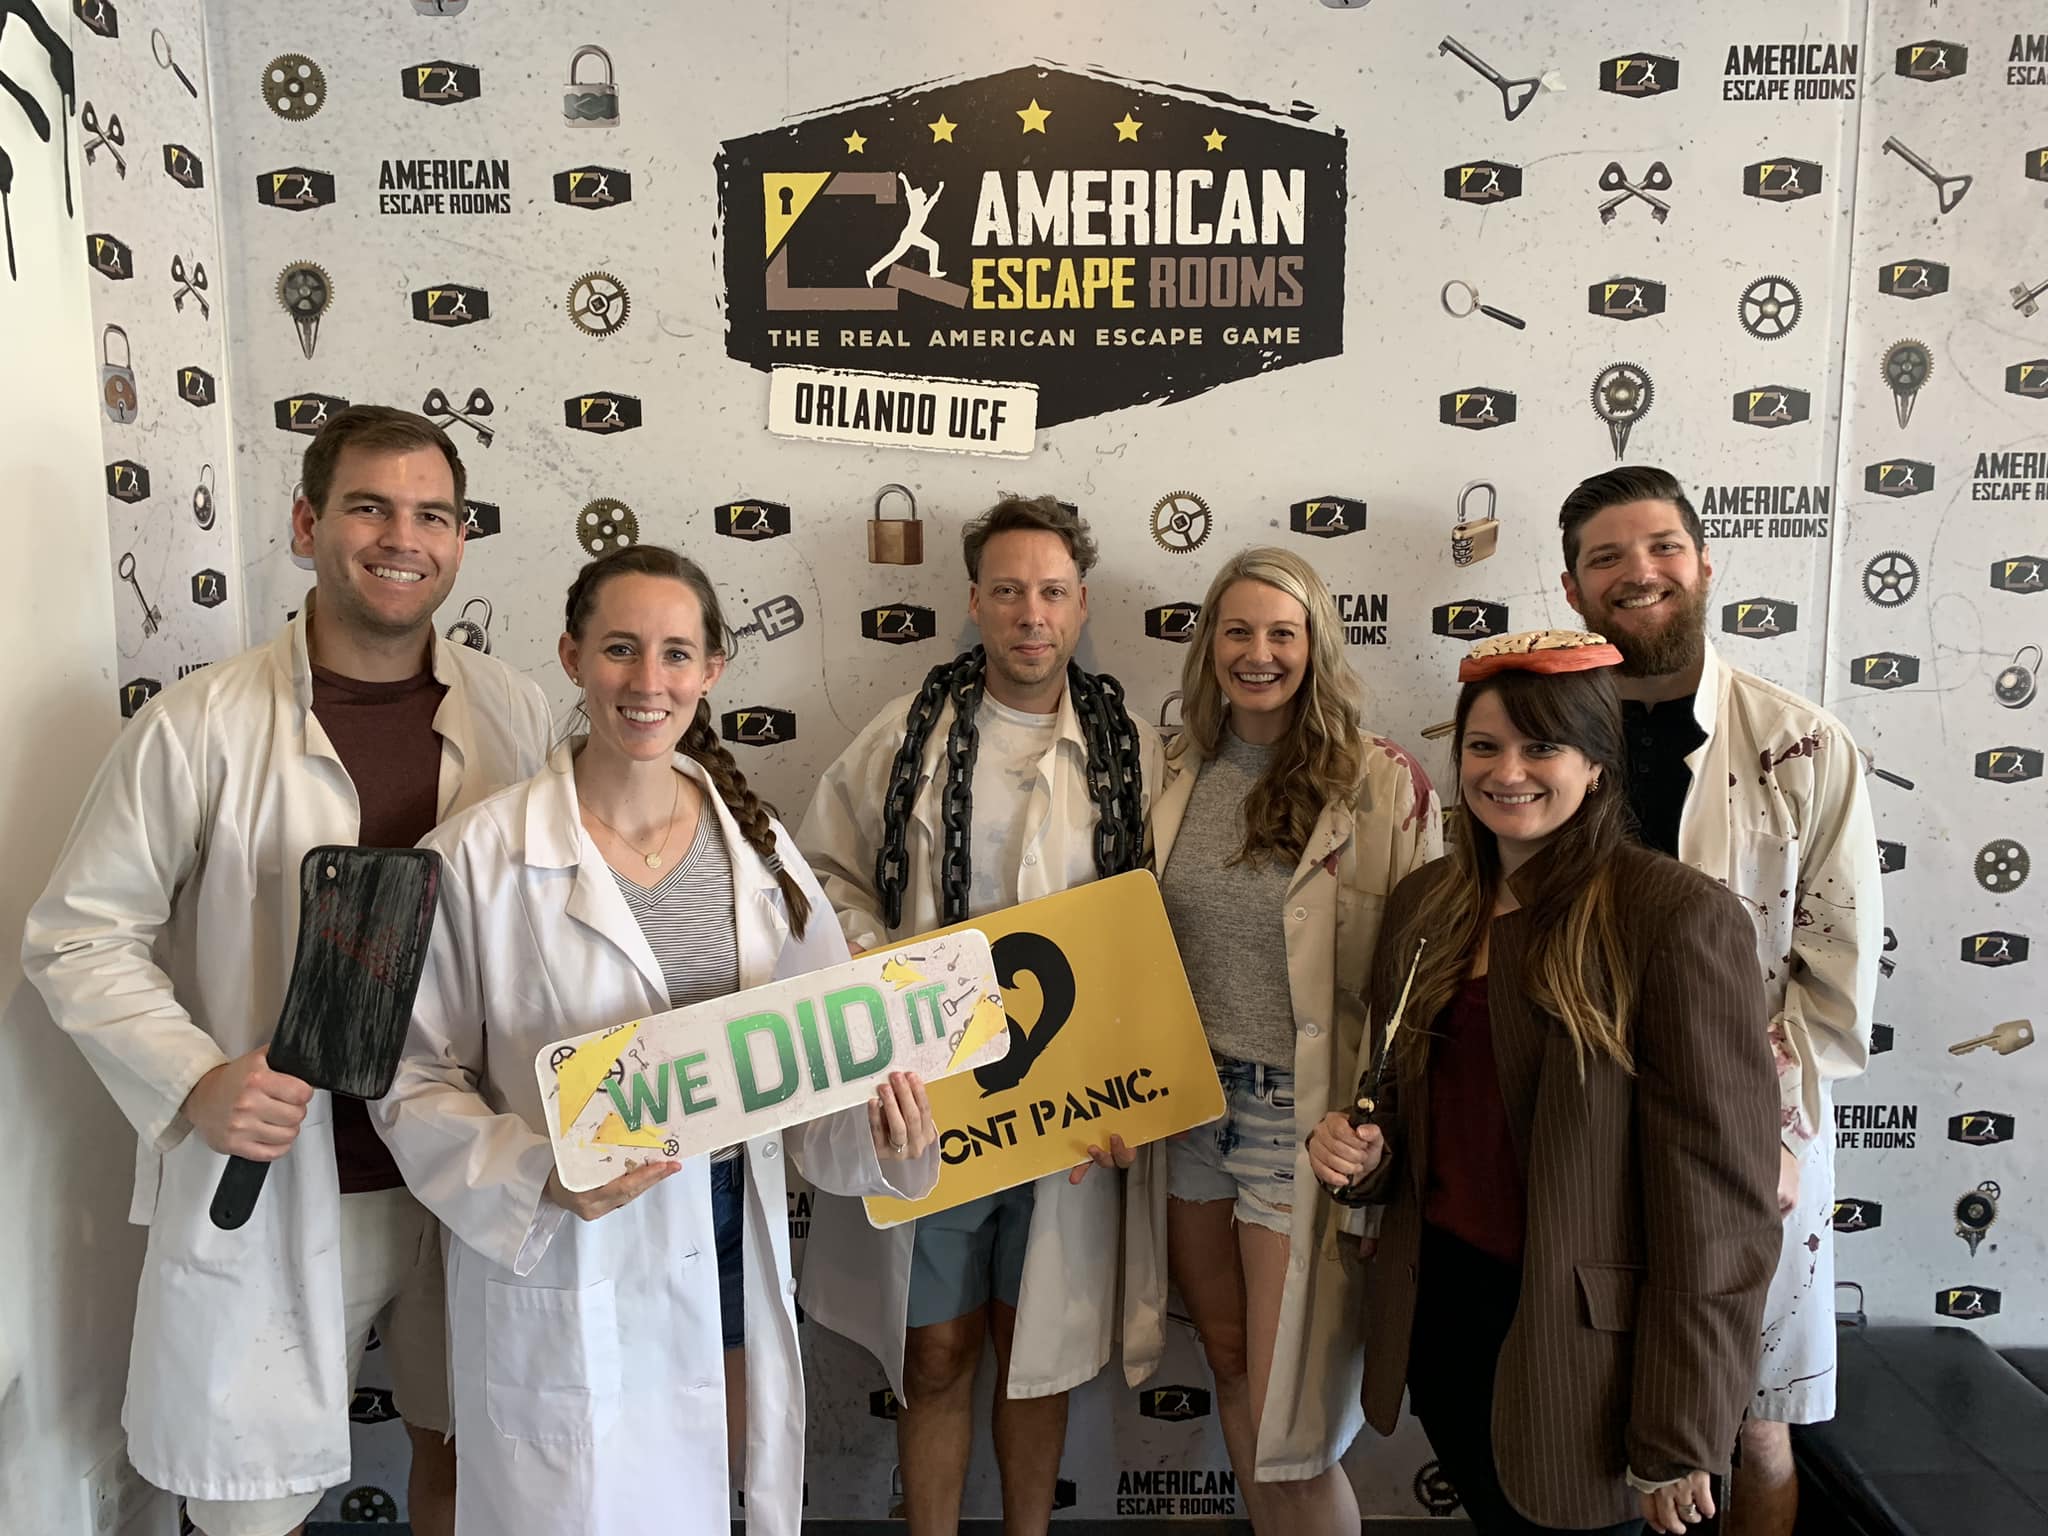 Team Macdarwal played the Mad Professor's Asylum - Orlando and finished the game with 14 minutes 21seconds left. Congratulations! Well done!